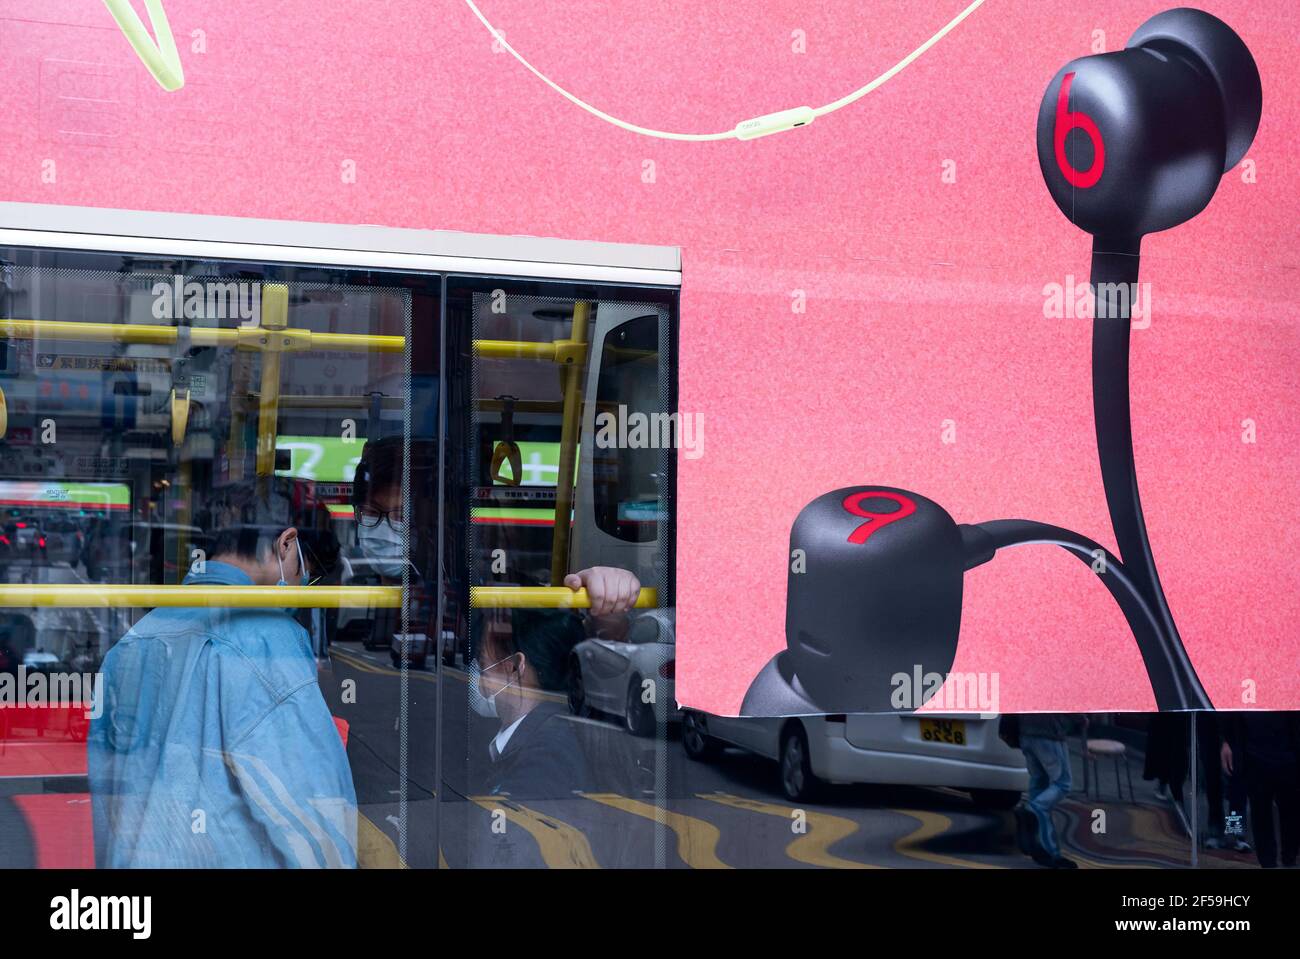 Hong Kong, China. 23rd Mar, 2021. A bus displays a commercial ad of the American consumer audio products manufacturer brand Beats Electronics LLC, also known as Beats by Dr. Dre or simply Beats by Dre, in Hong Kong. Credit: Budrul Chukrut/SOPA Images/ZUMA Wire/Alamy Live News Stock Photo